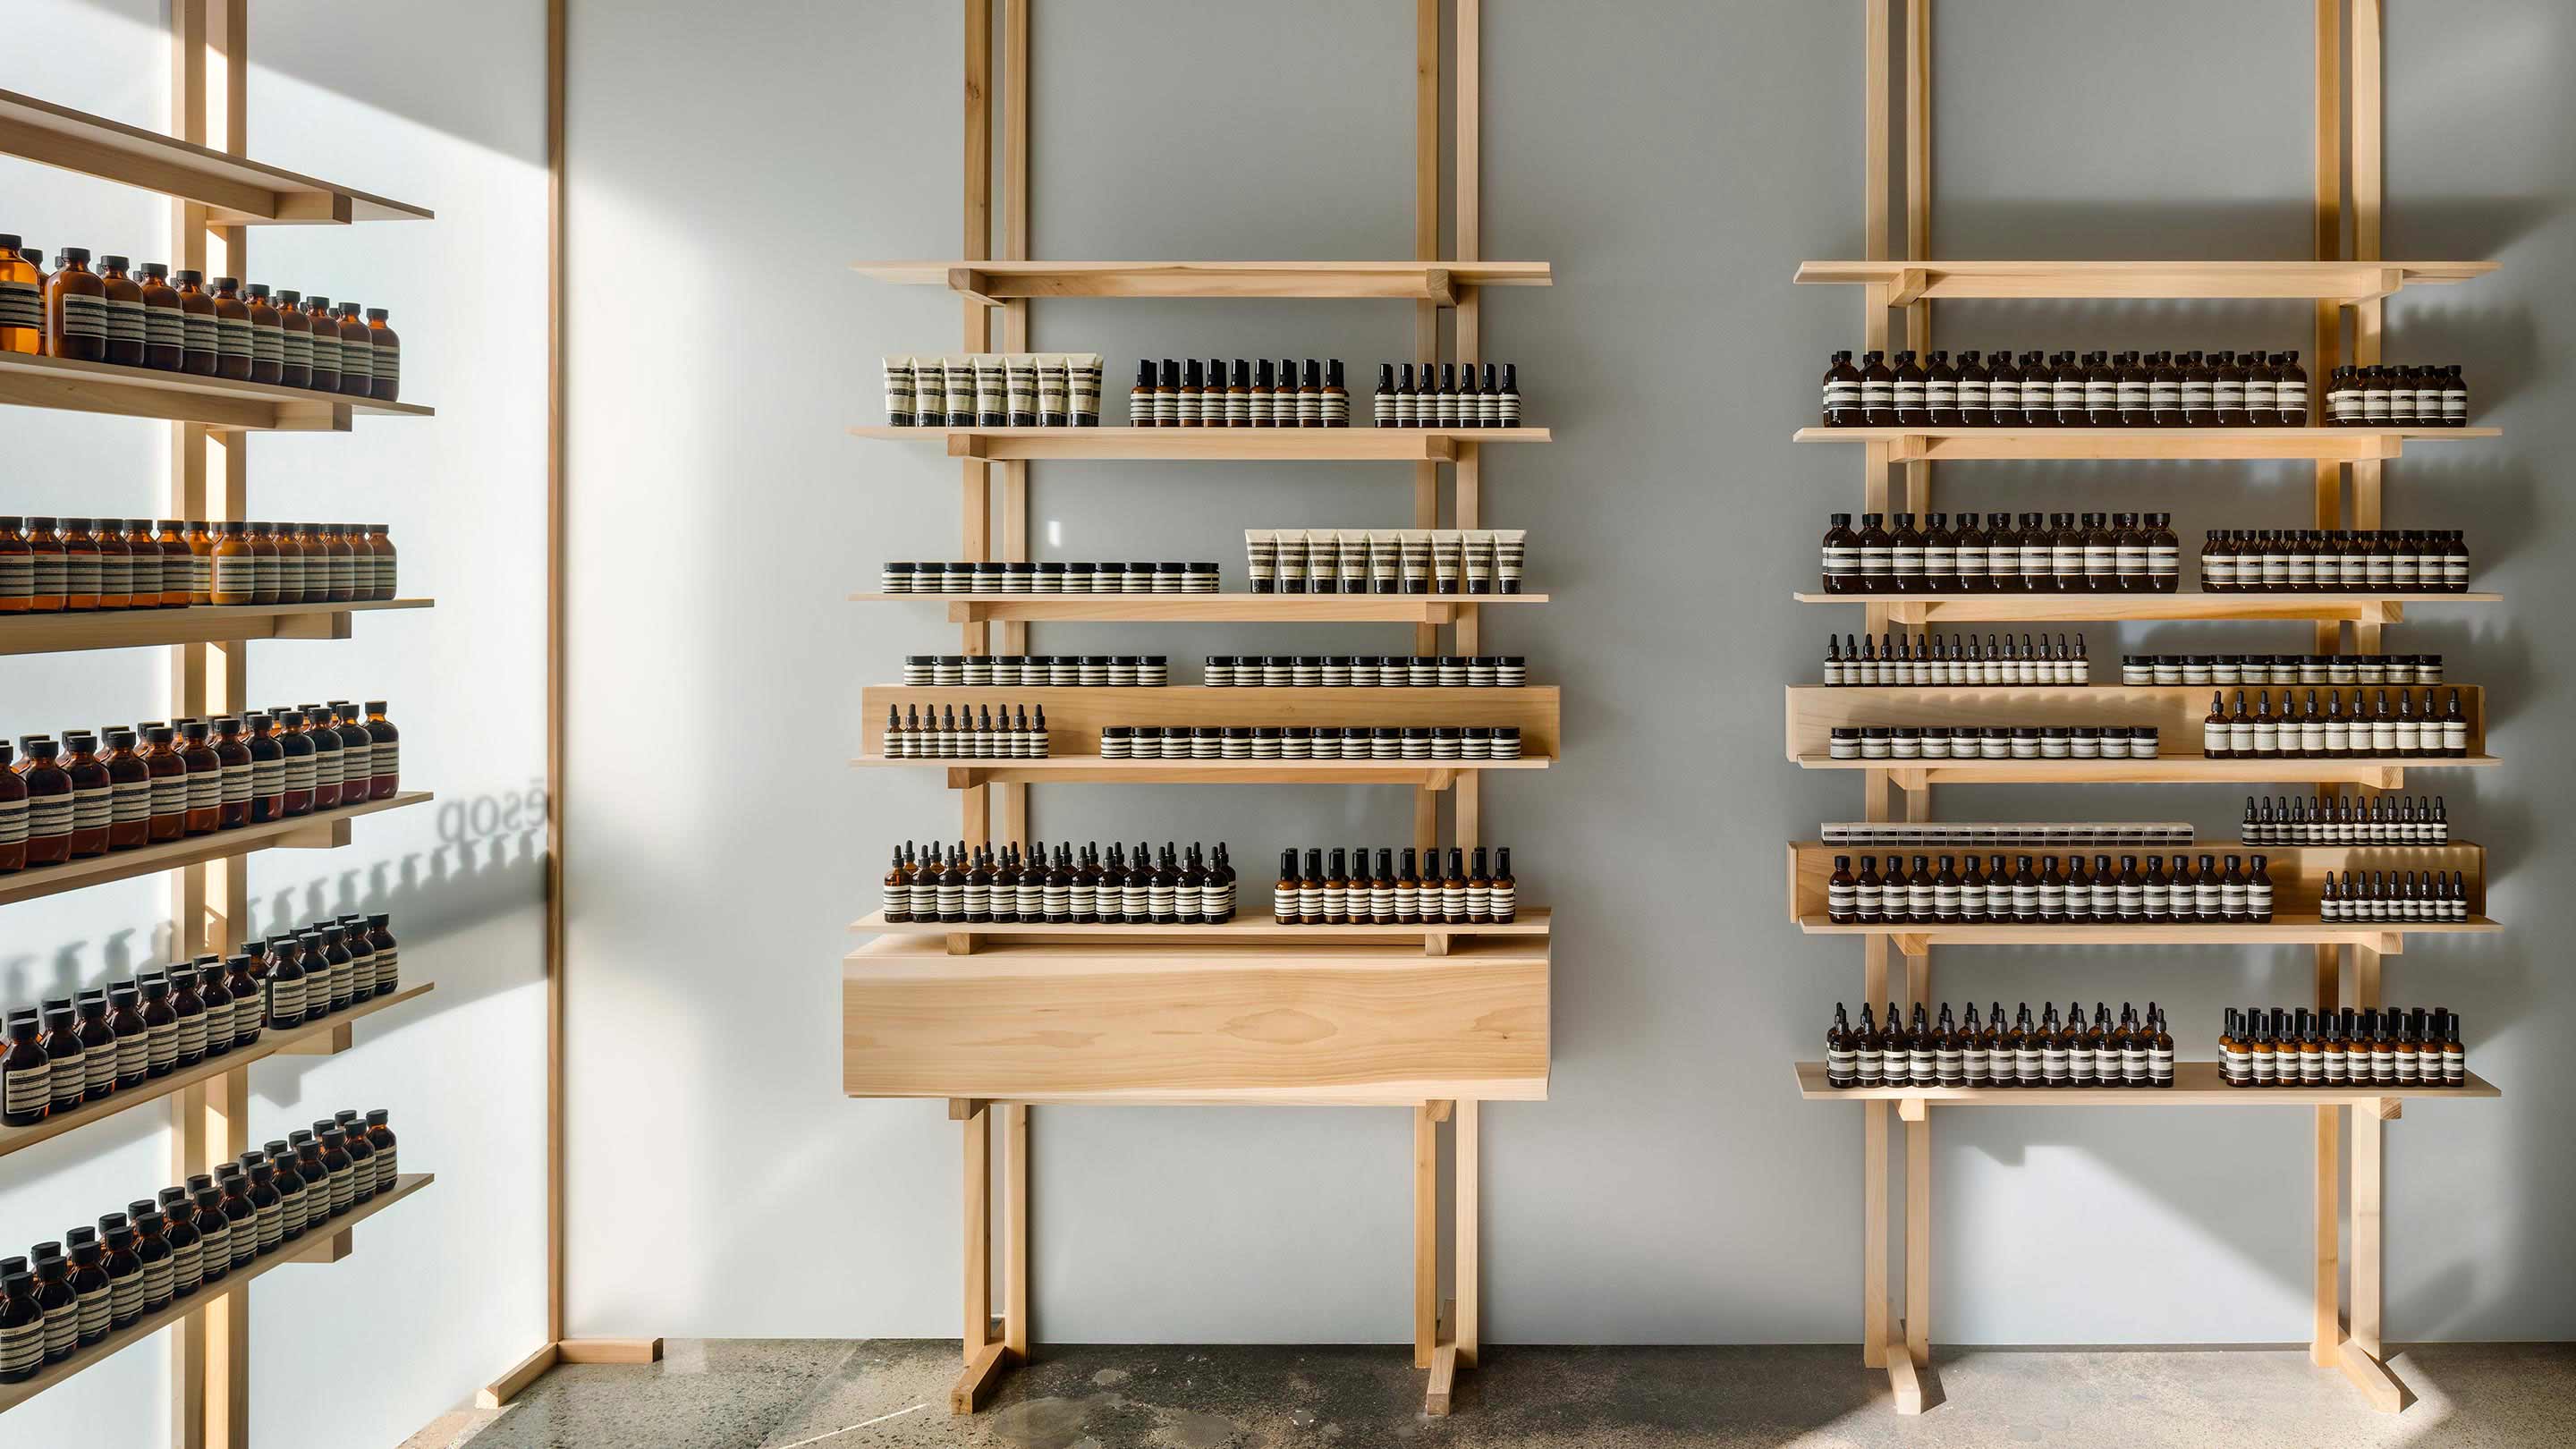 Wooden shelves with frosted panels hold the Aesop product range